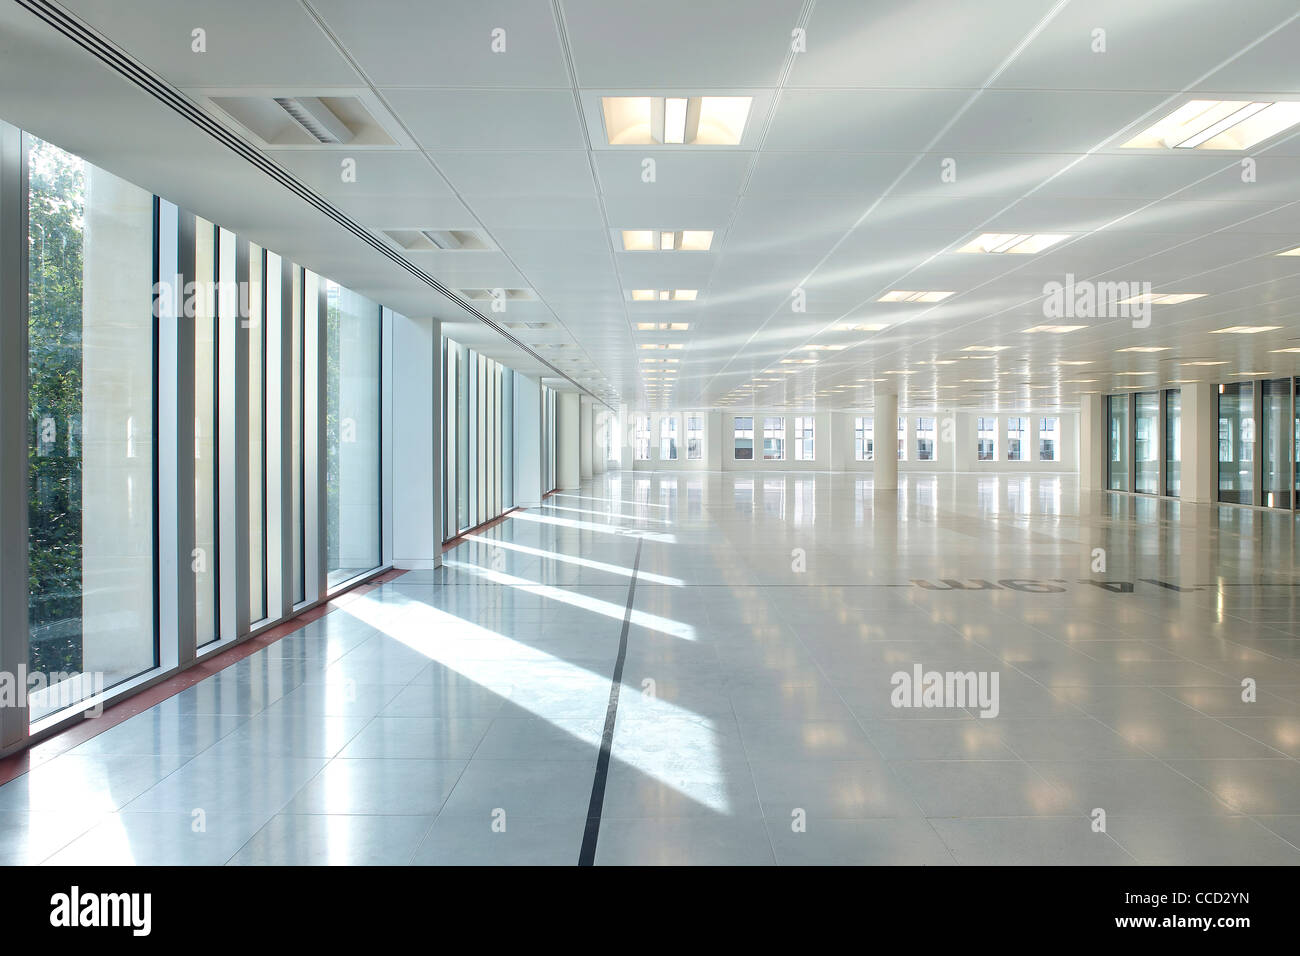 ONE SOUTHAMPTON ROW, SHEPPARD ROBSON, LONDON, 2010, LARGE EMPTY INTERIOR SPACE Stock Photo